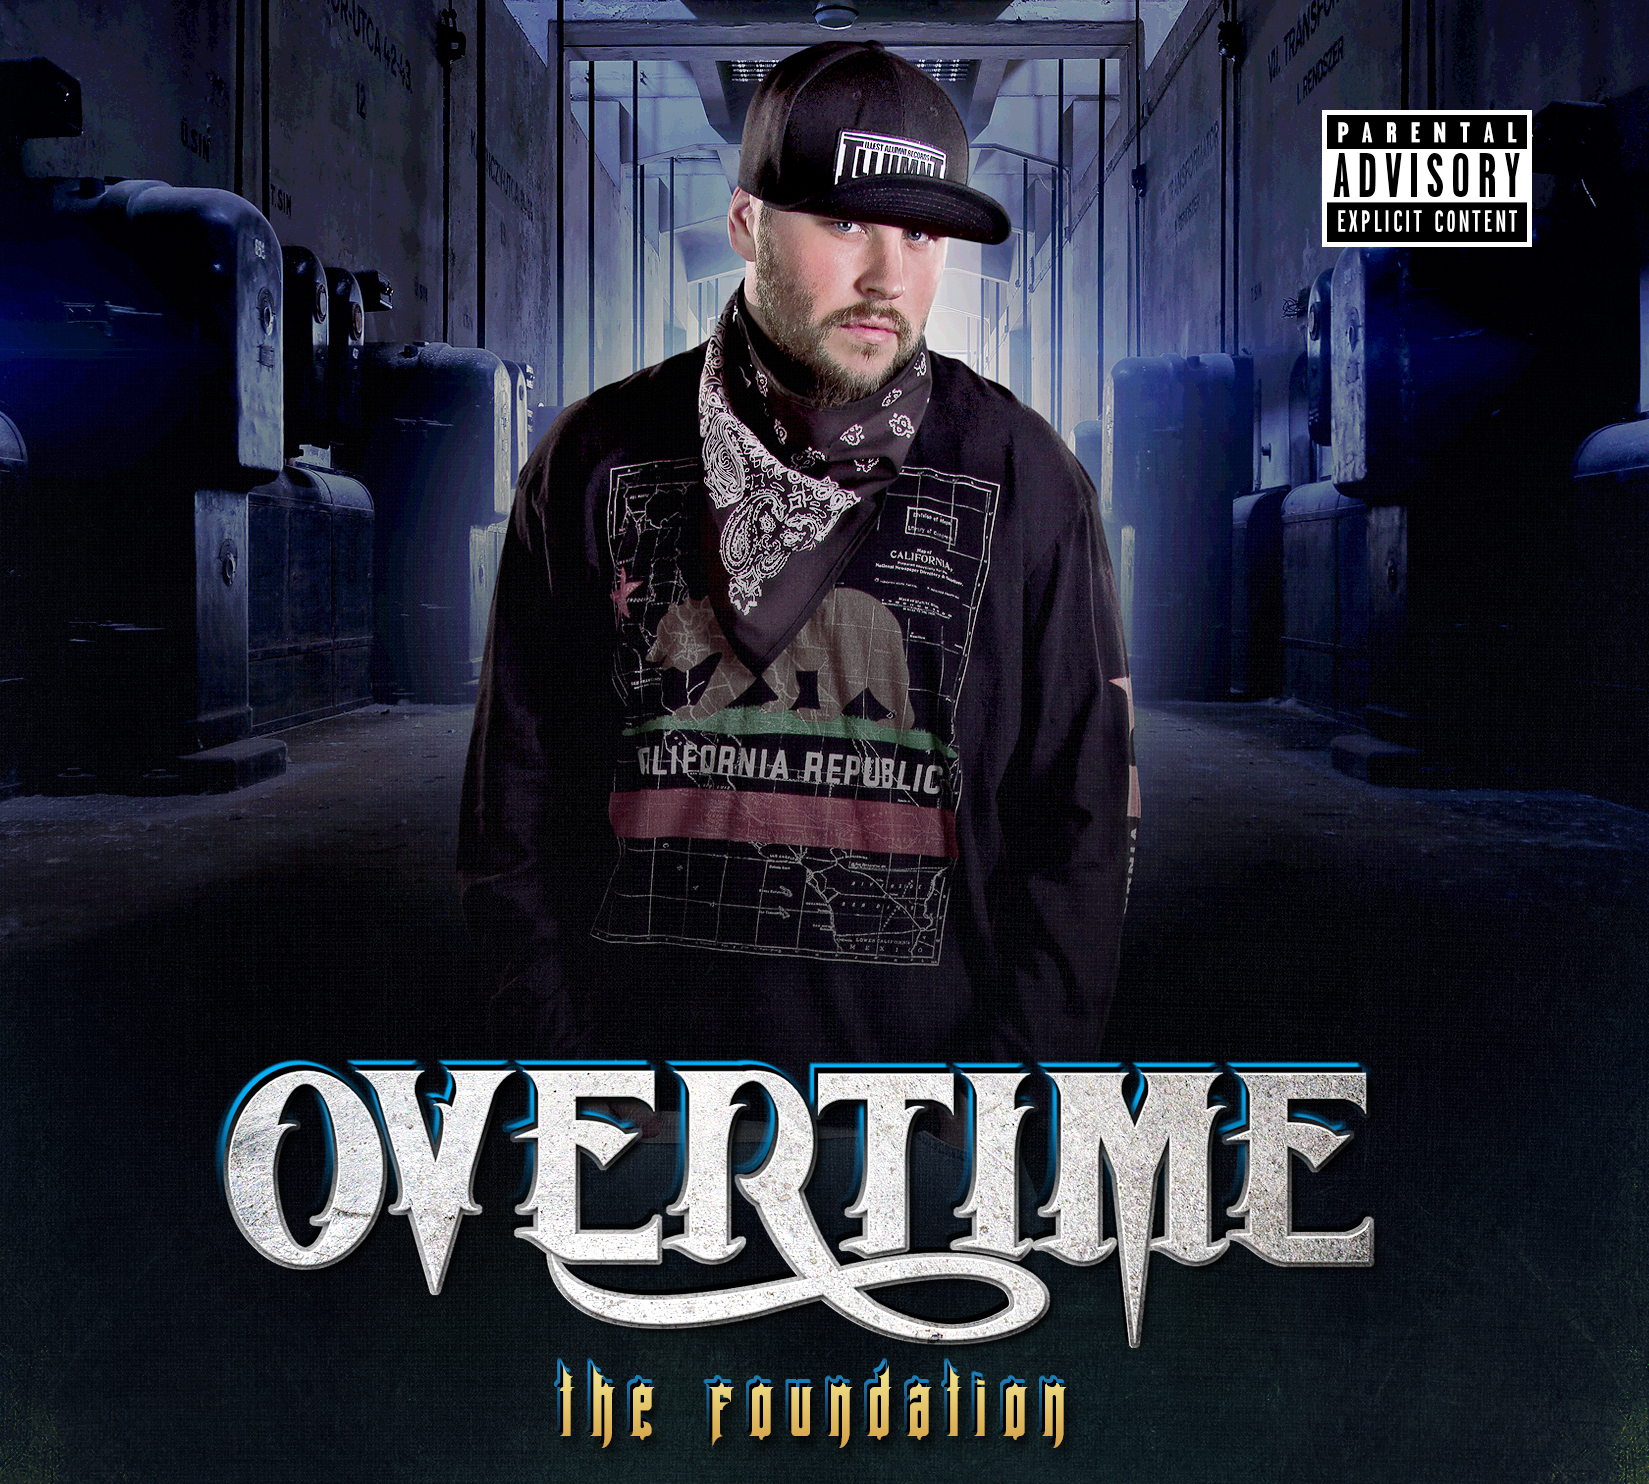 Self Made in America: Autographed CD - Overtime